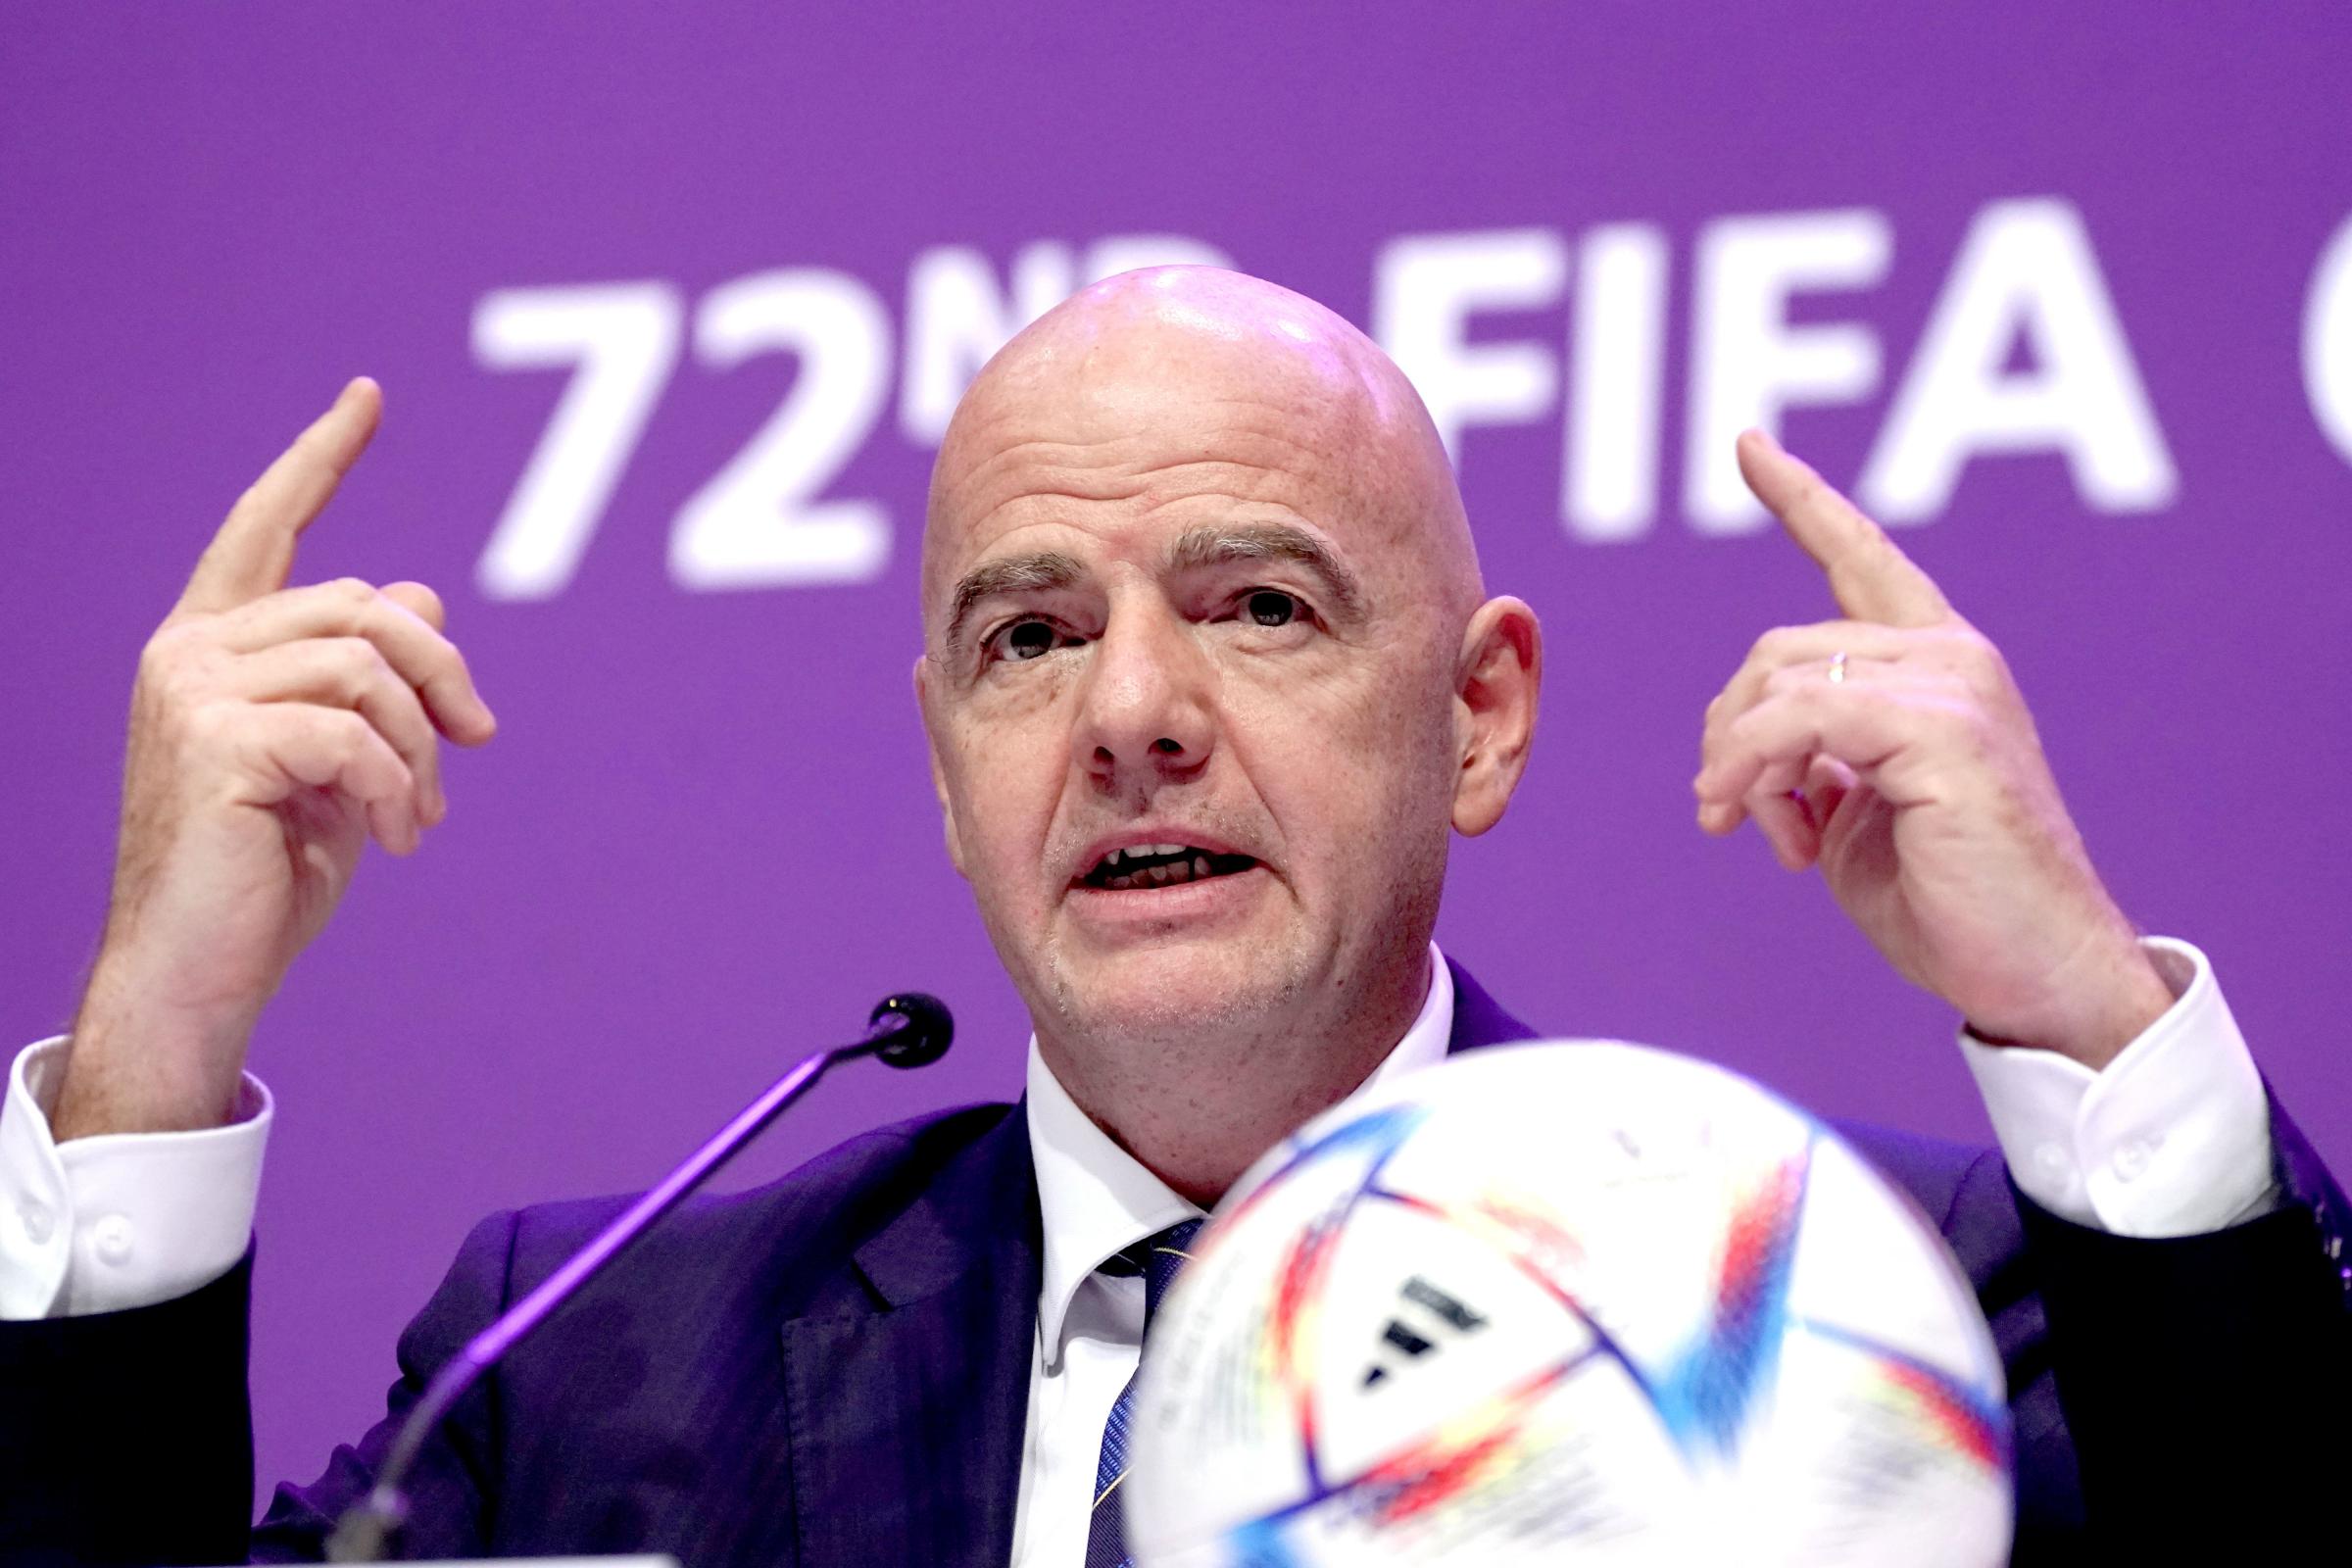 Human rights groups ask FIFA for millions to help migrant workers in Qatar